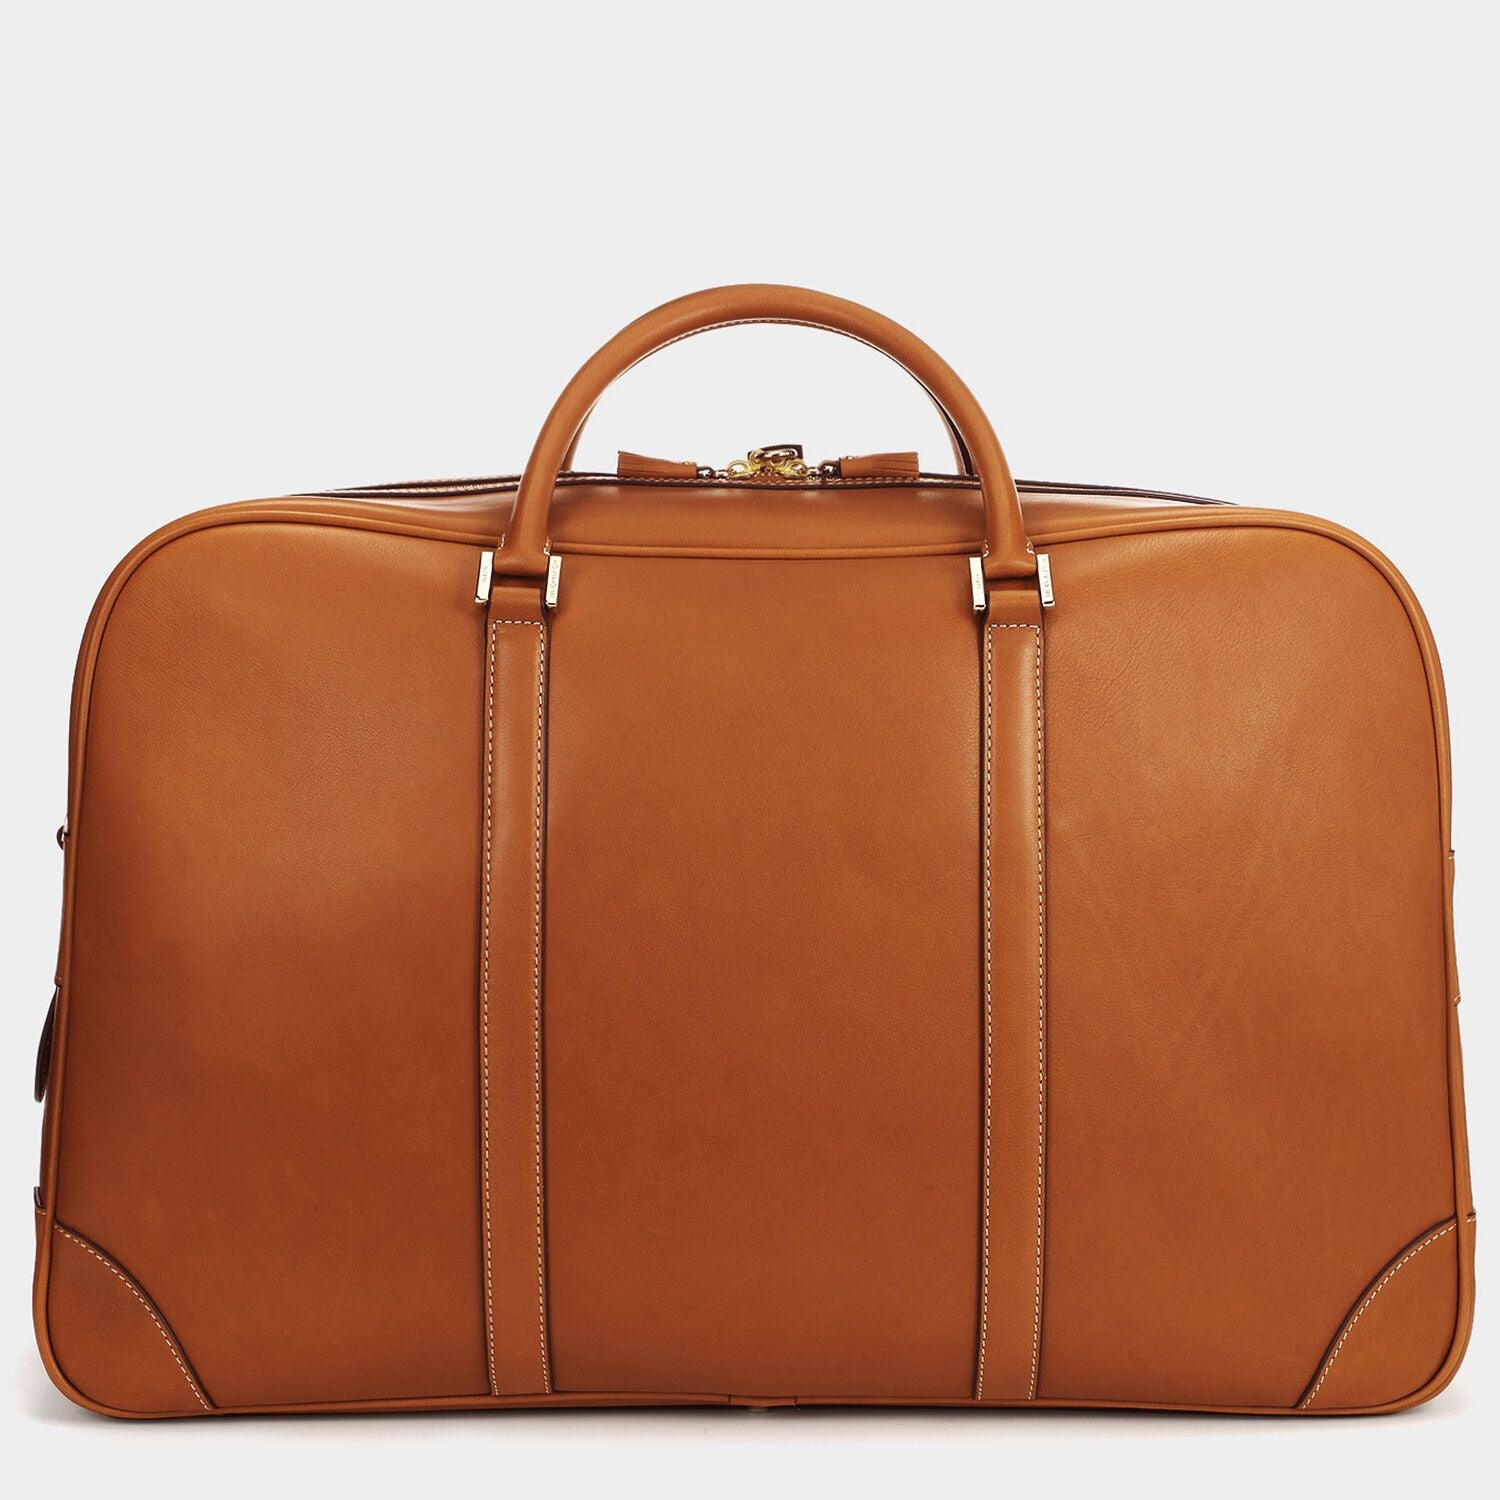 Bespoke Weekend Latimer -

                  
                    Butter Leather in Tan -
                  

                  Anya Hindmarch US
